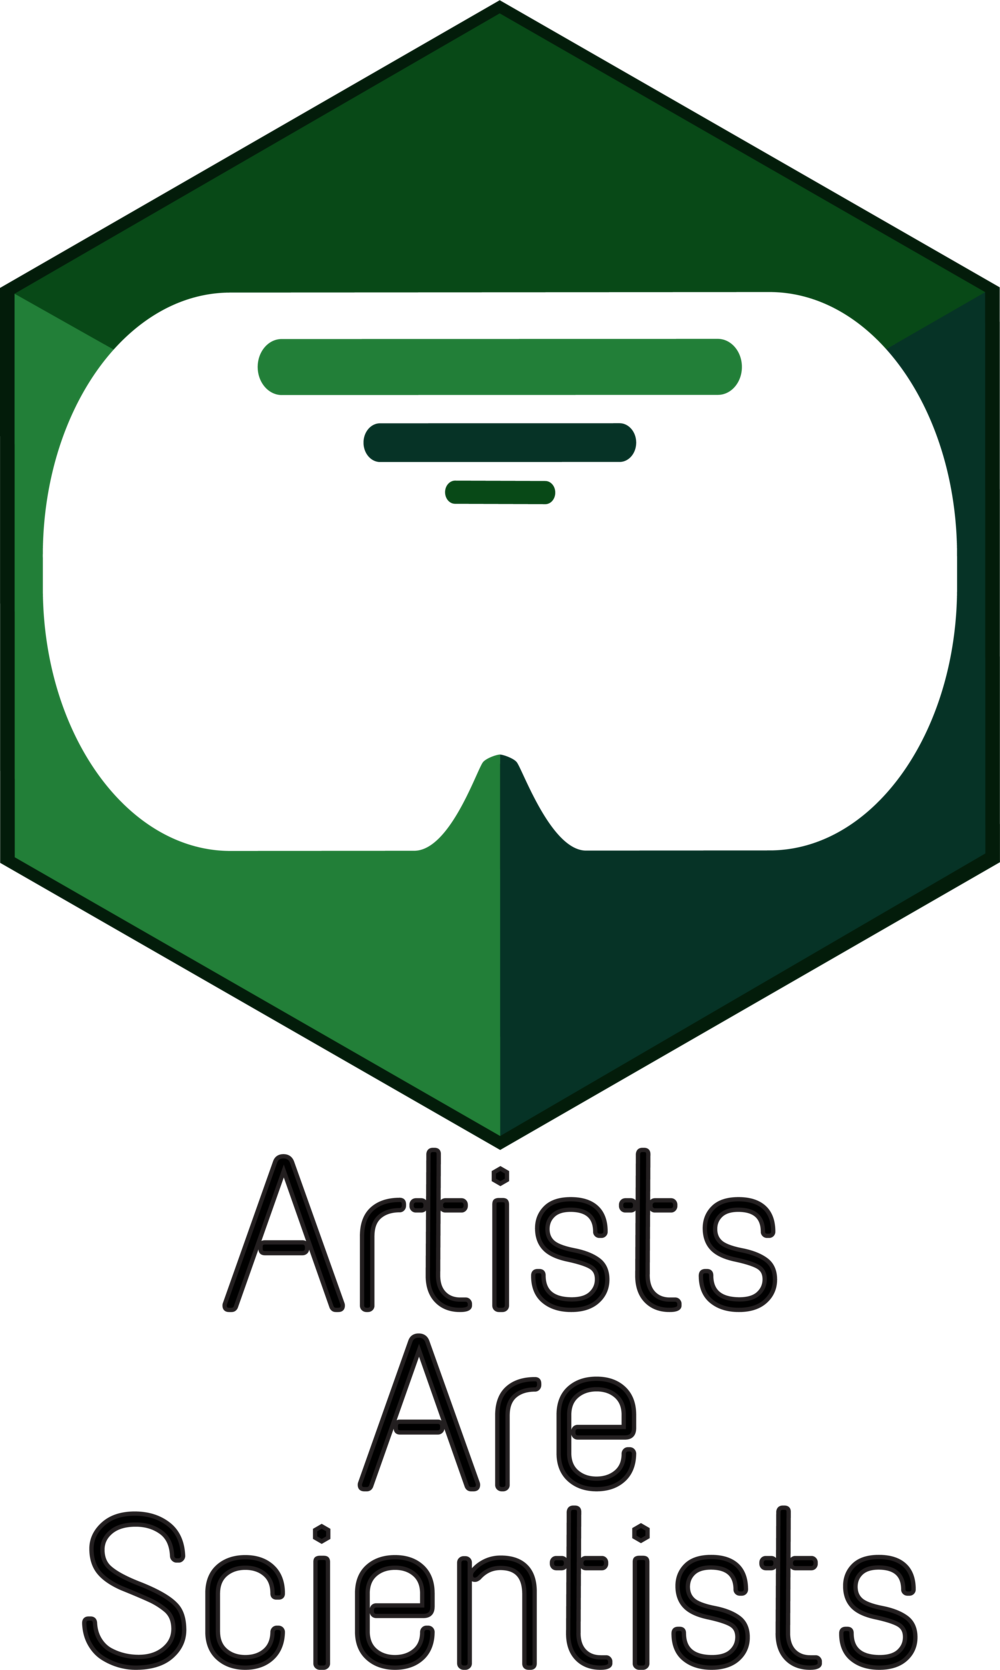 Artists Are Scientists Site Logo Vertical - Artists Are Scientists (1000x1670)